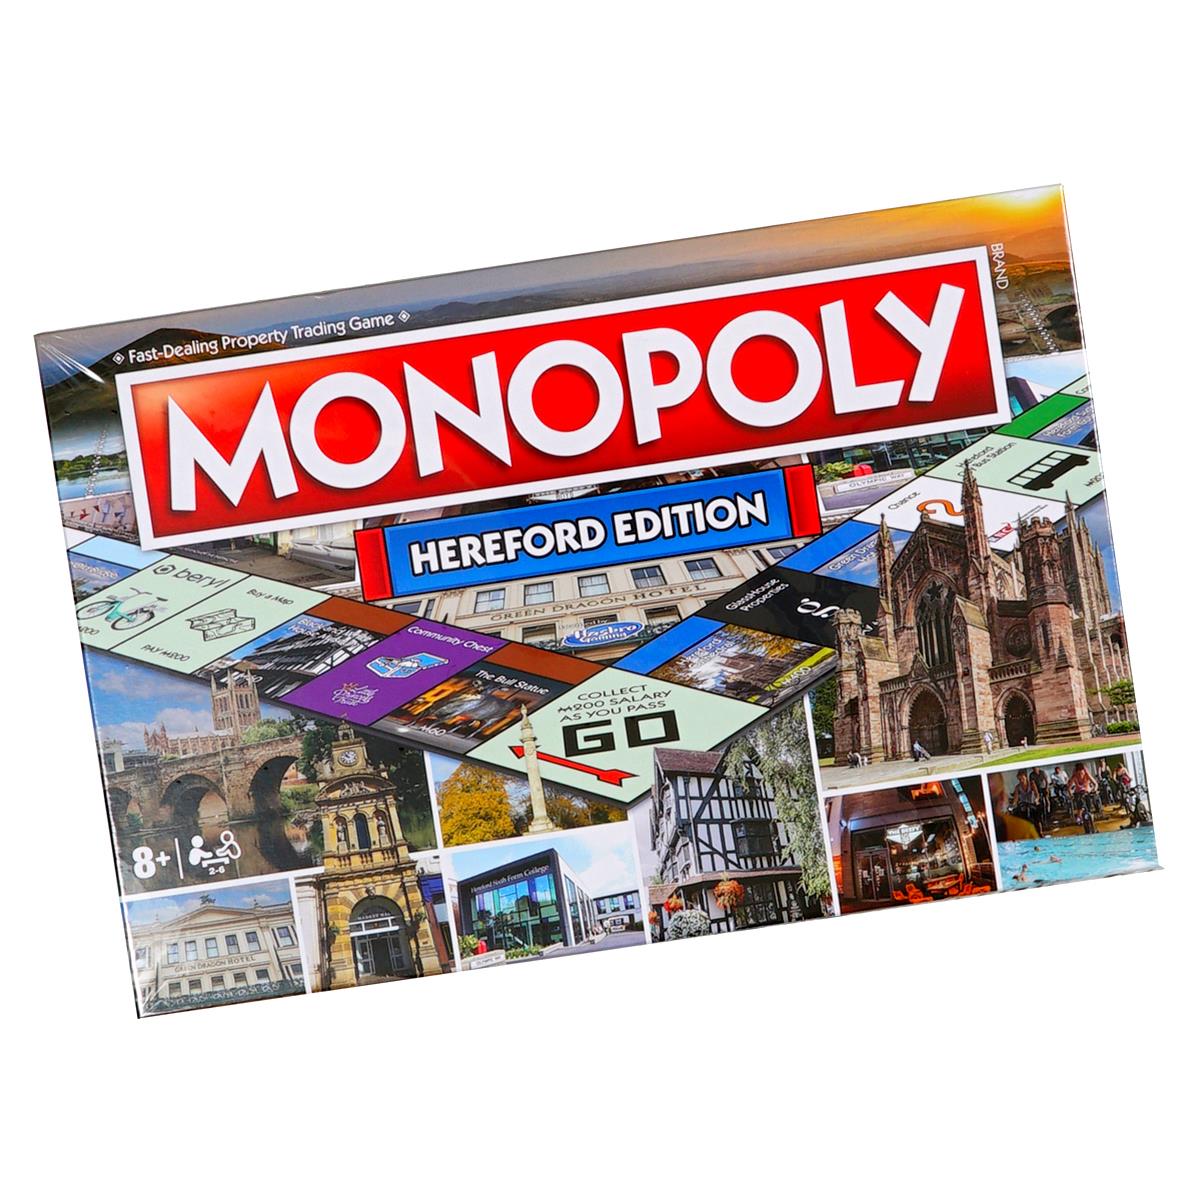 What's the top feat of Hereford United FC in the Hereford Monopoly game?